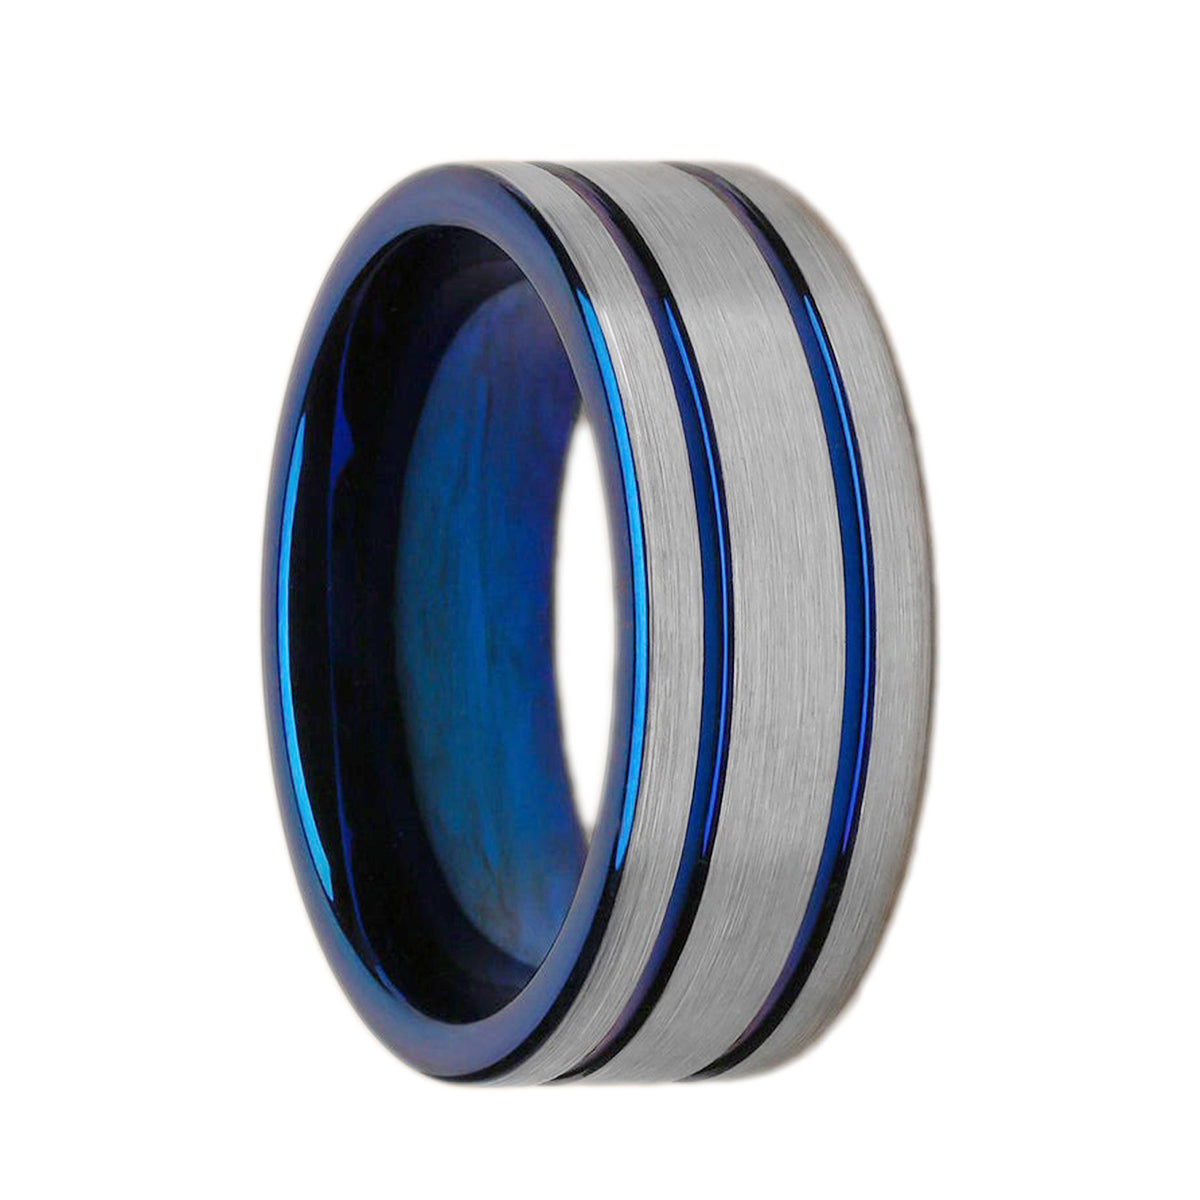 8mm Blue Tungsten Wedding Ring With 2 Blue Grooves, Brushed Finish ...